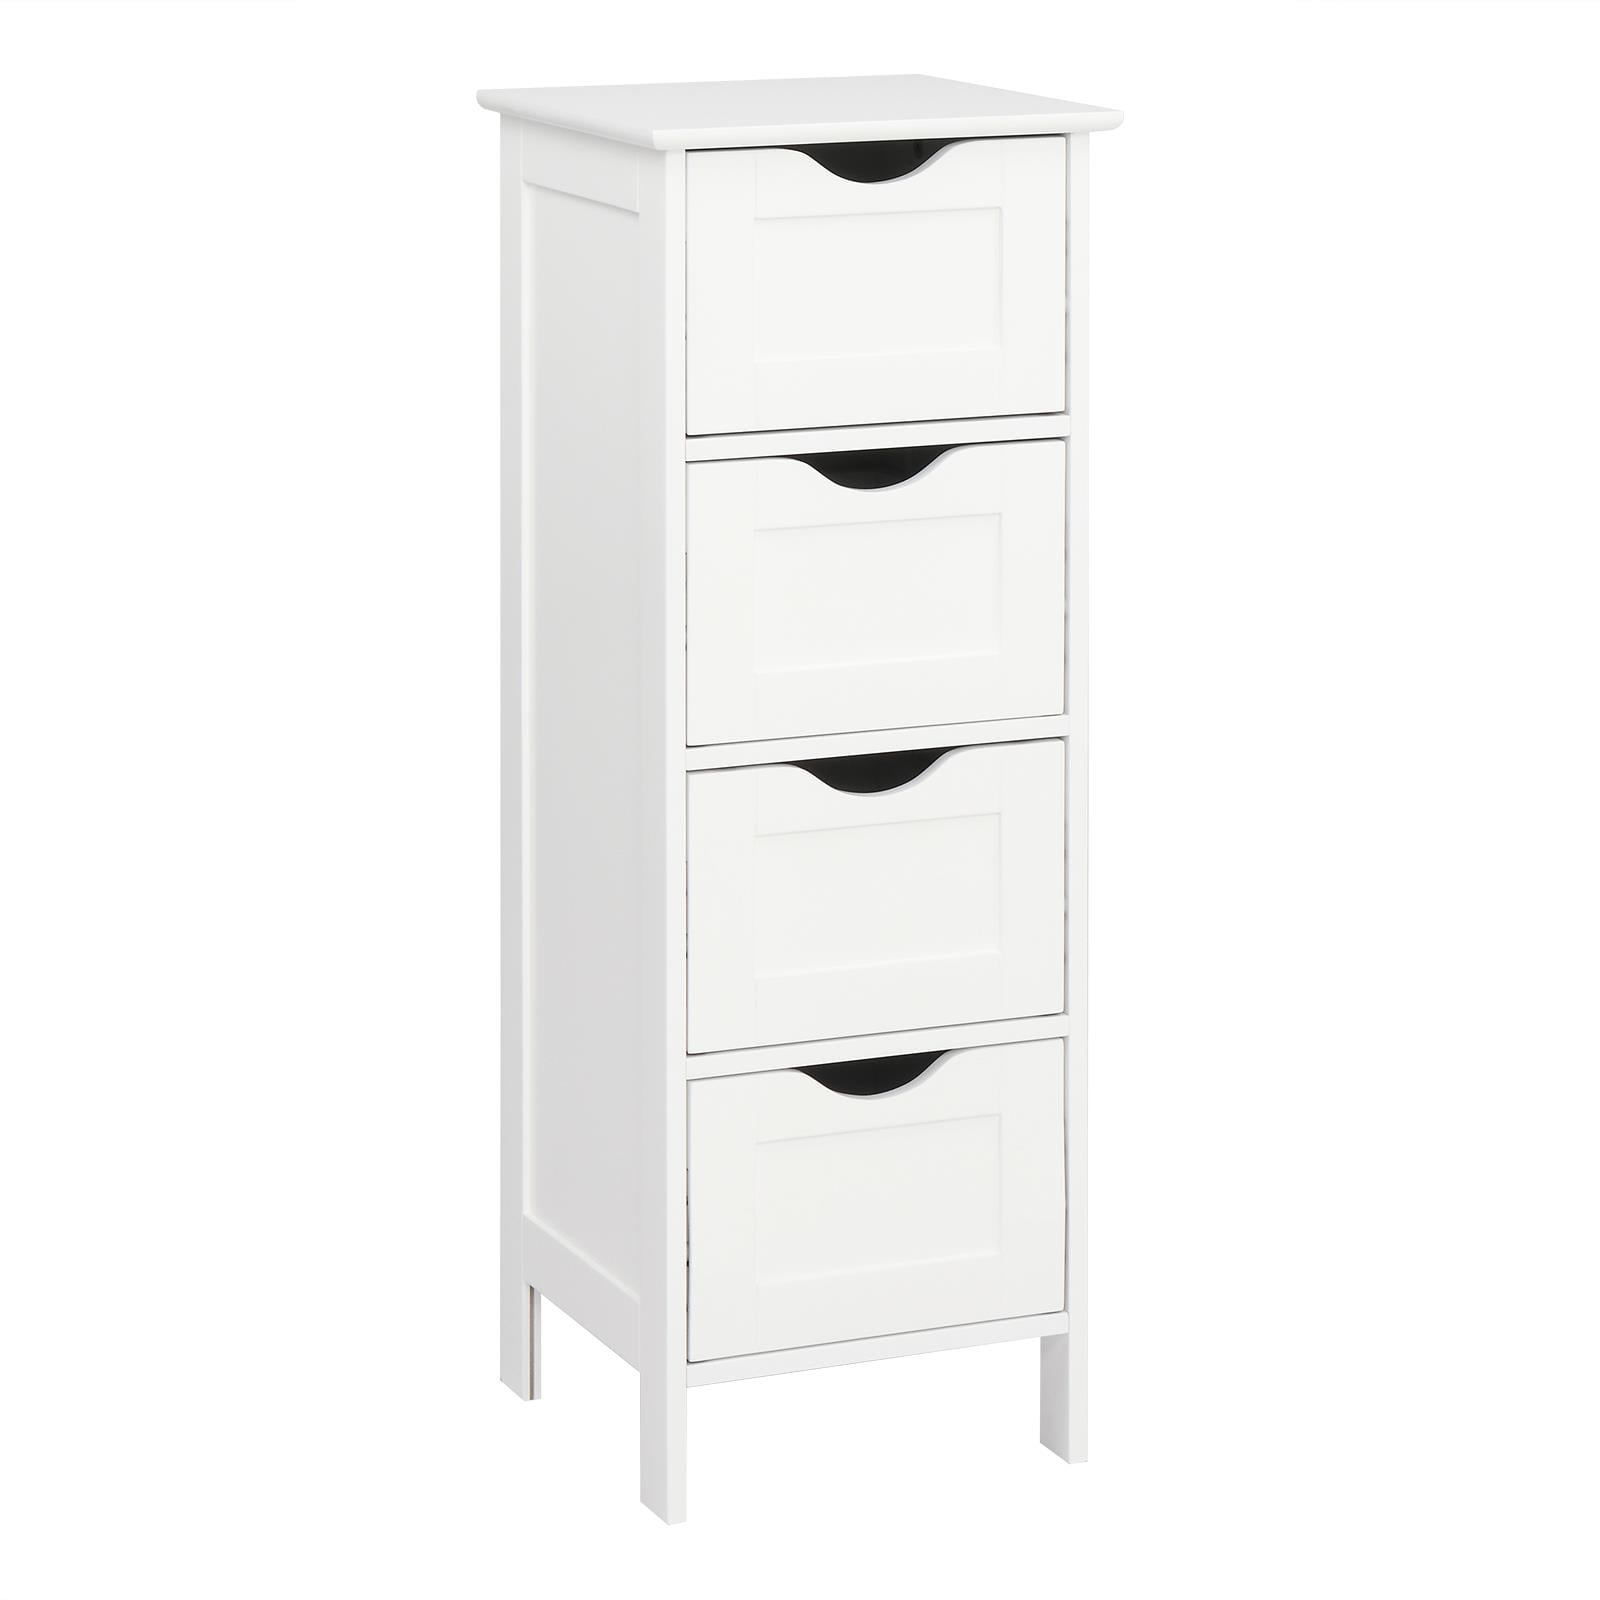 Bathroom 4 Drawer Cabinet Storage Cupboard Wooden White Unit By Home  Discount